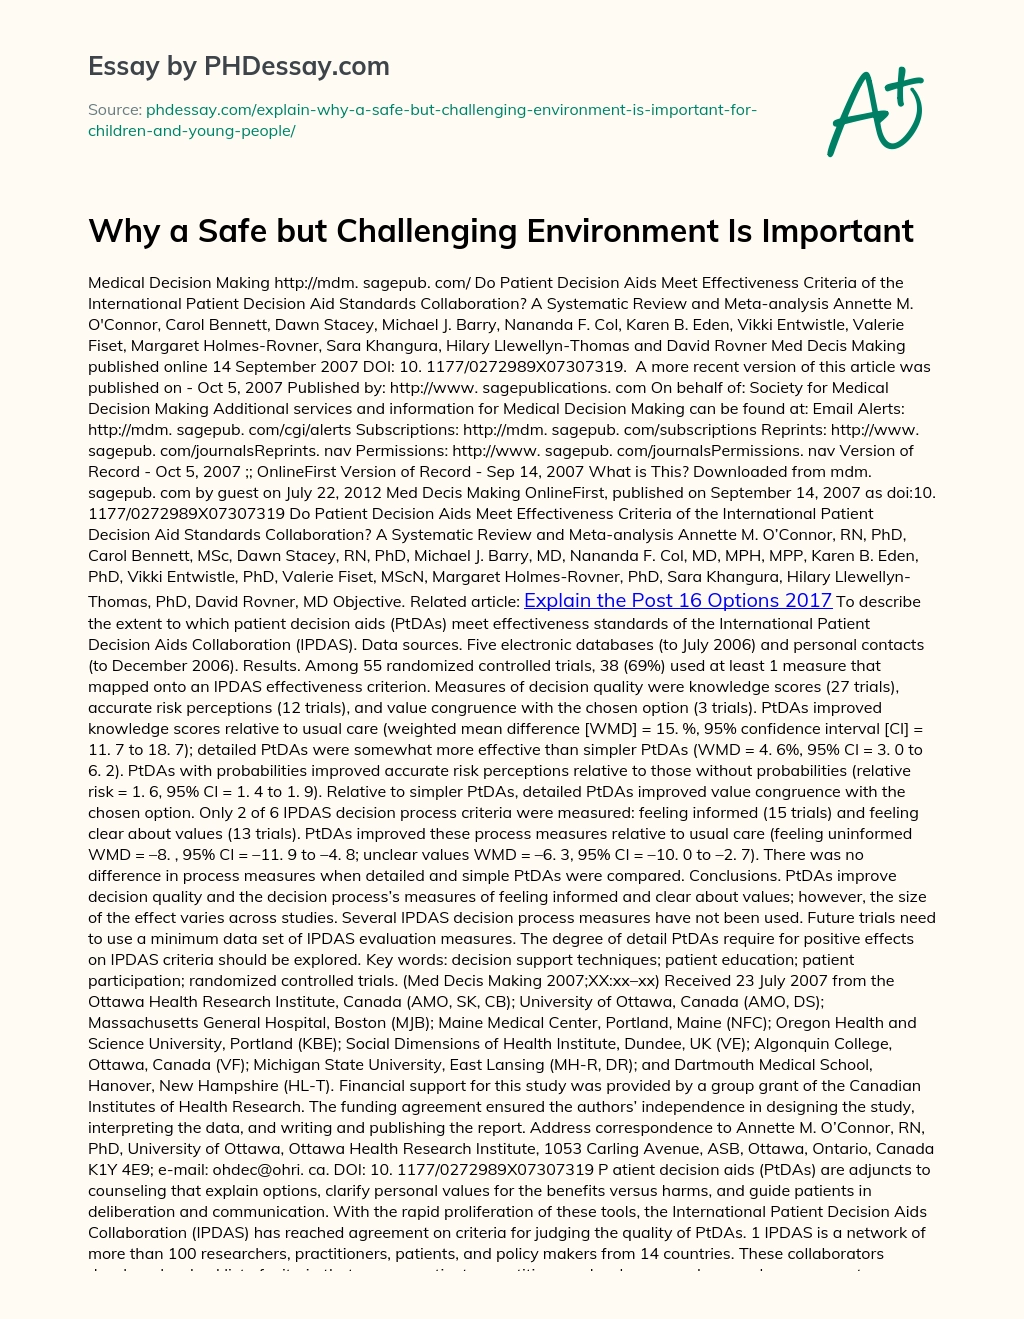 Why a Safe but Challenging Environment Is Important essay